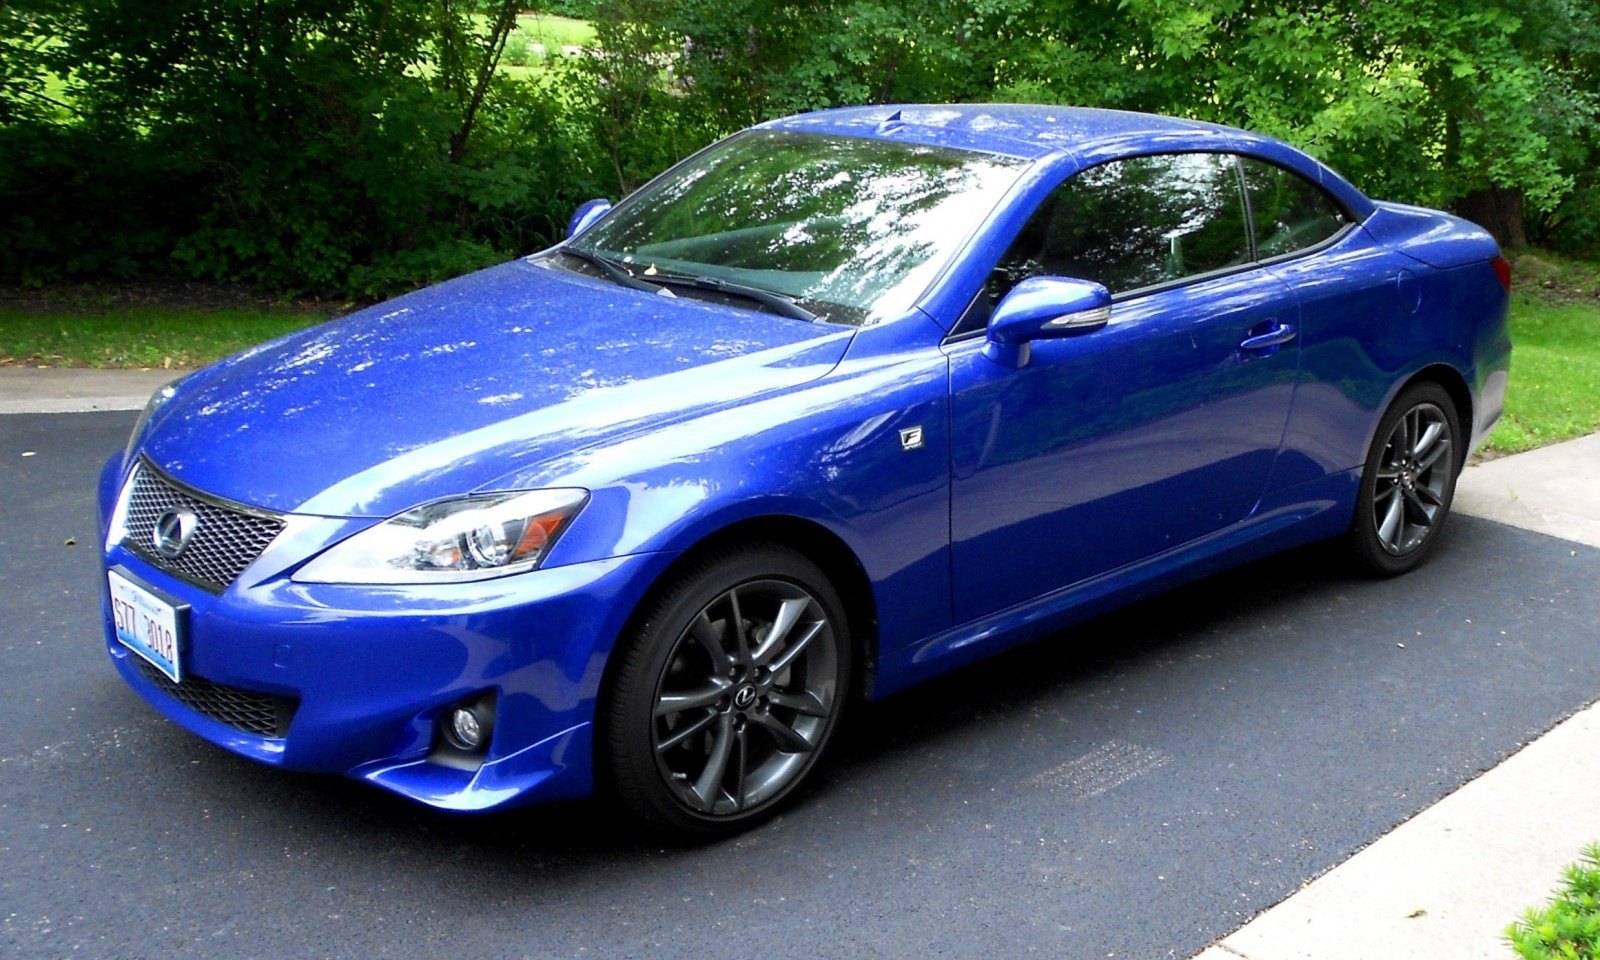 road test review – 2014 lexus is250 f sport convertible is sexy